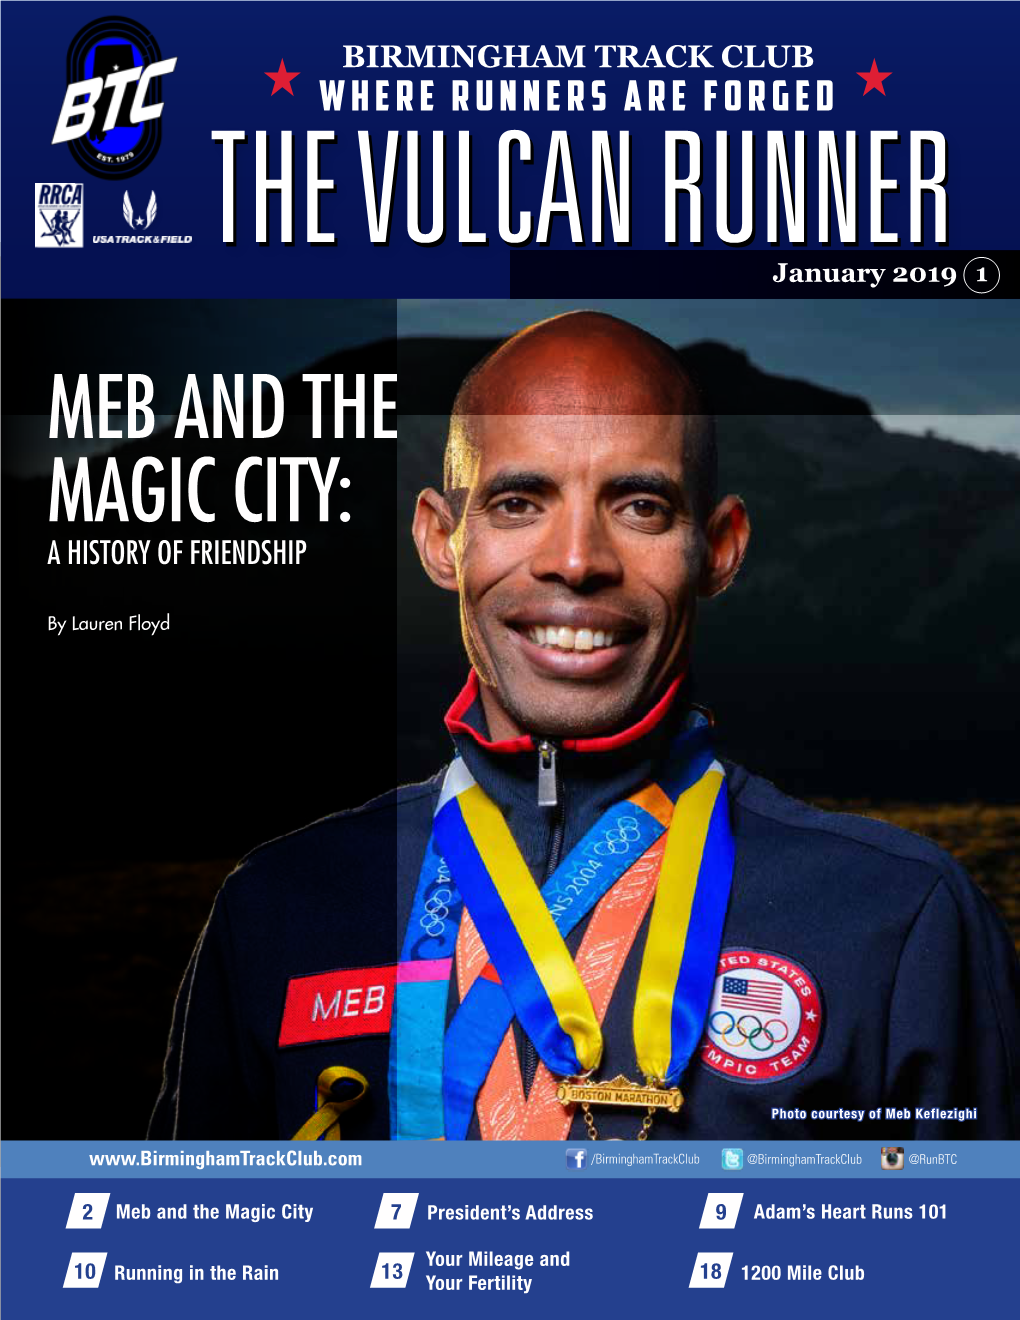 Meb and the Magic City: a History of Friendship